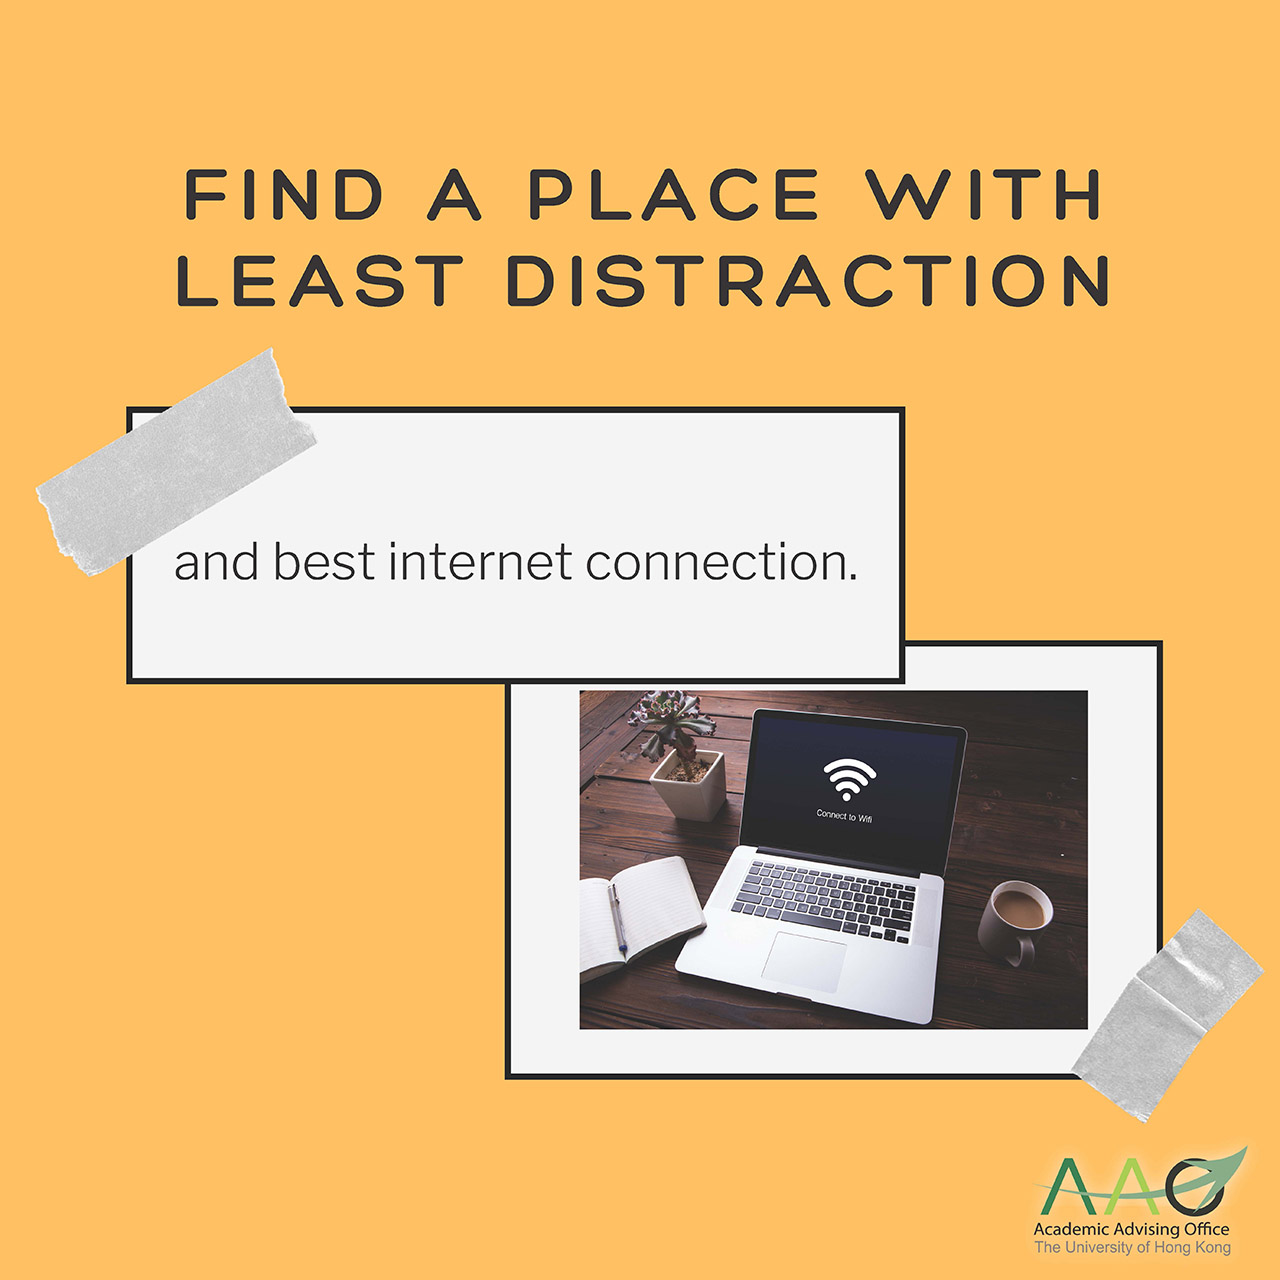 Find a place with least distraction and best internet connection.